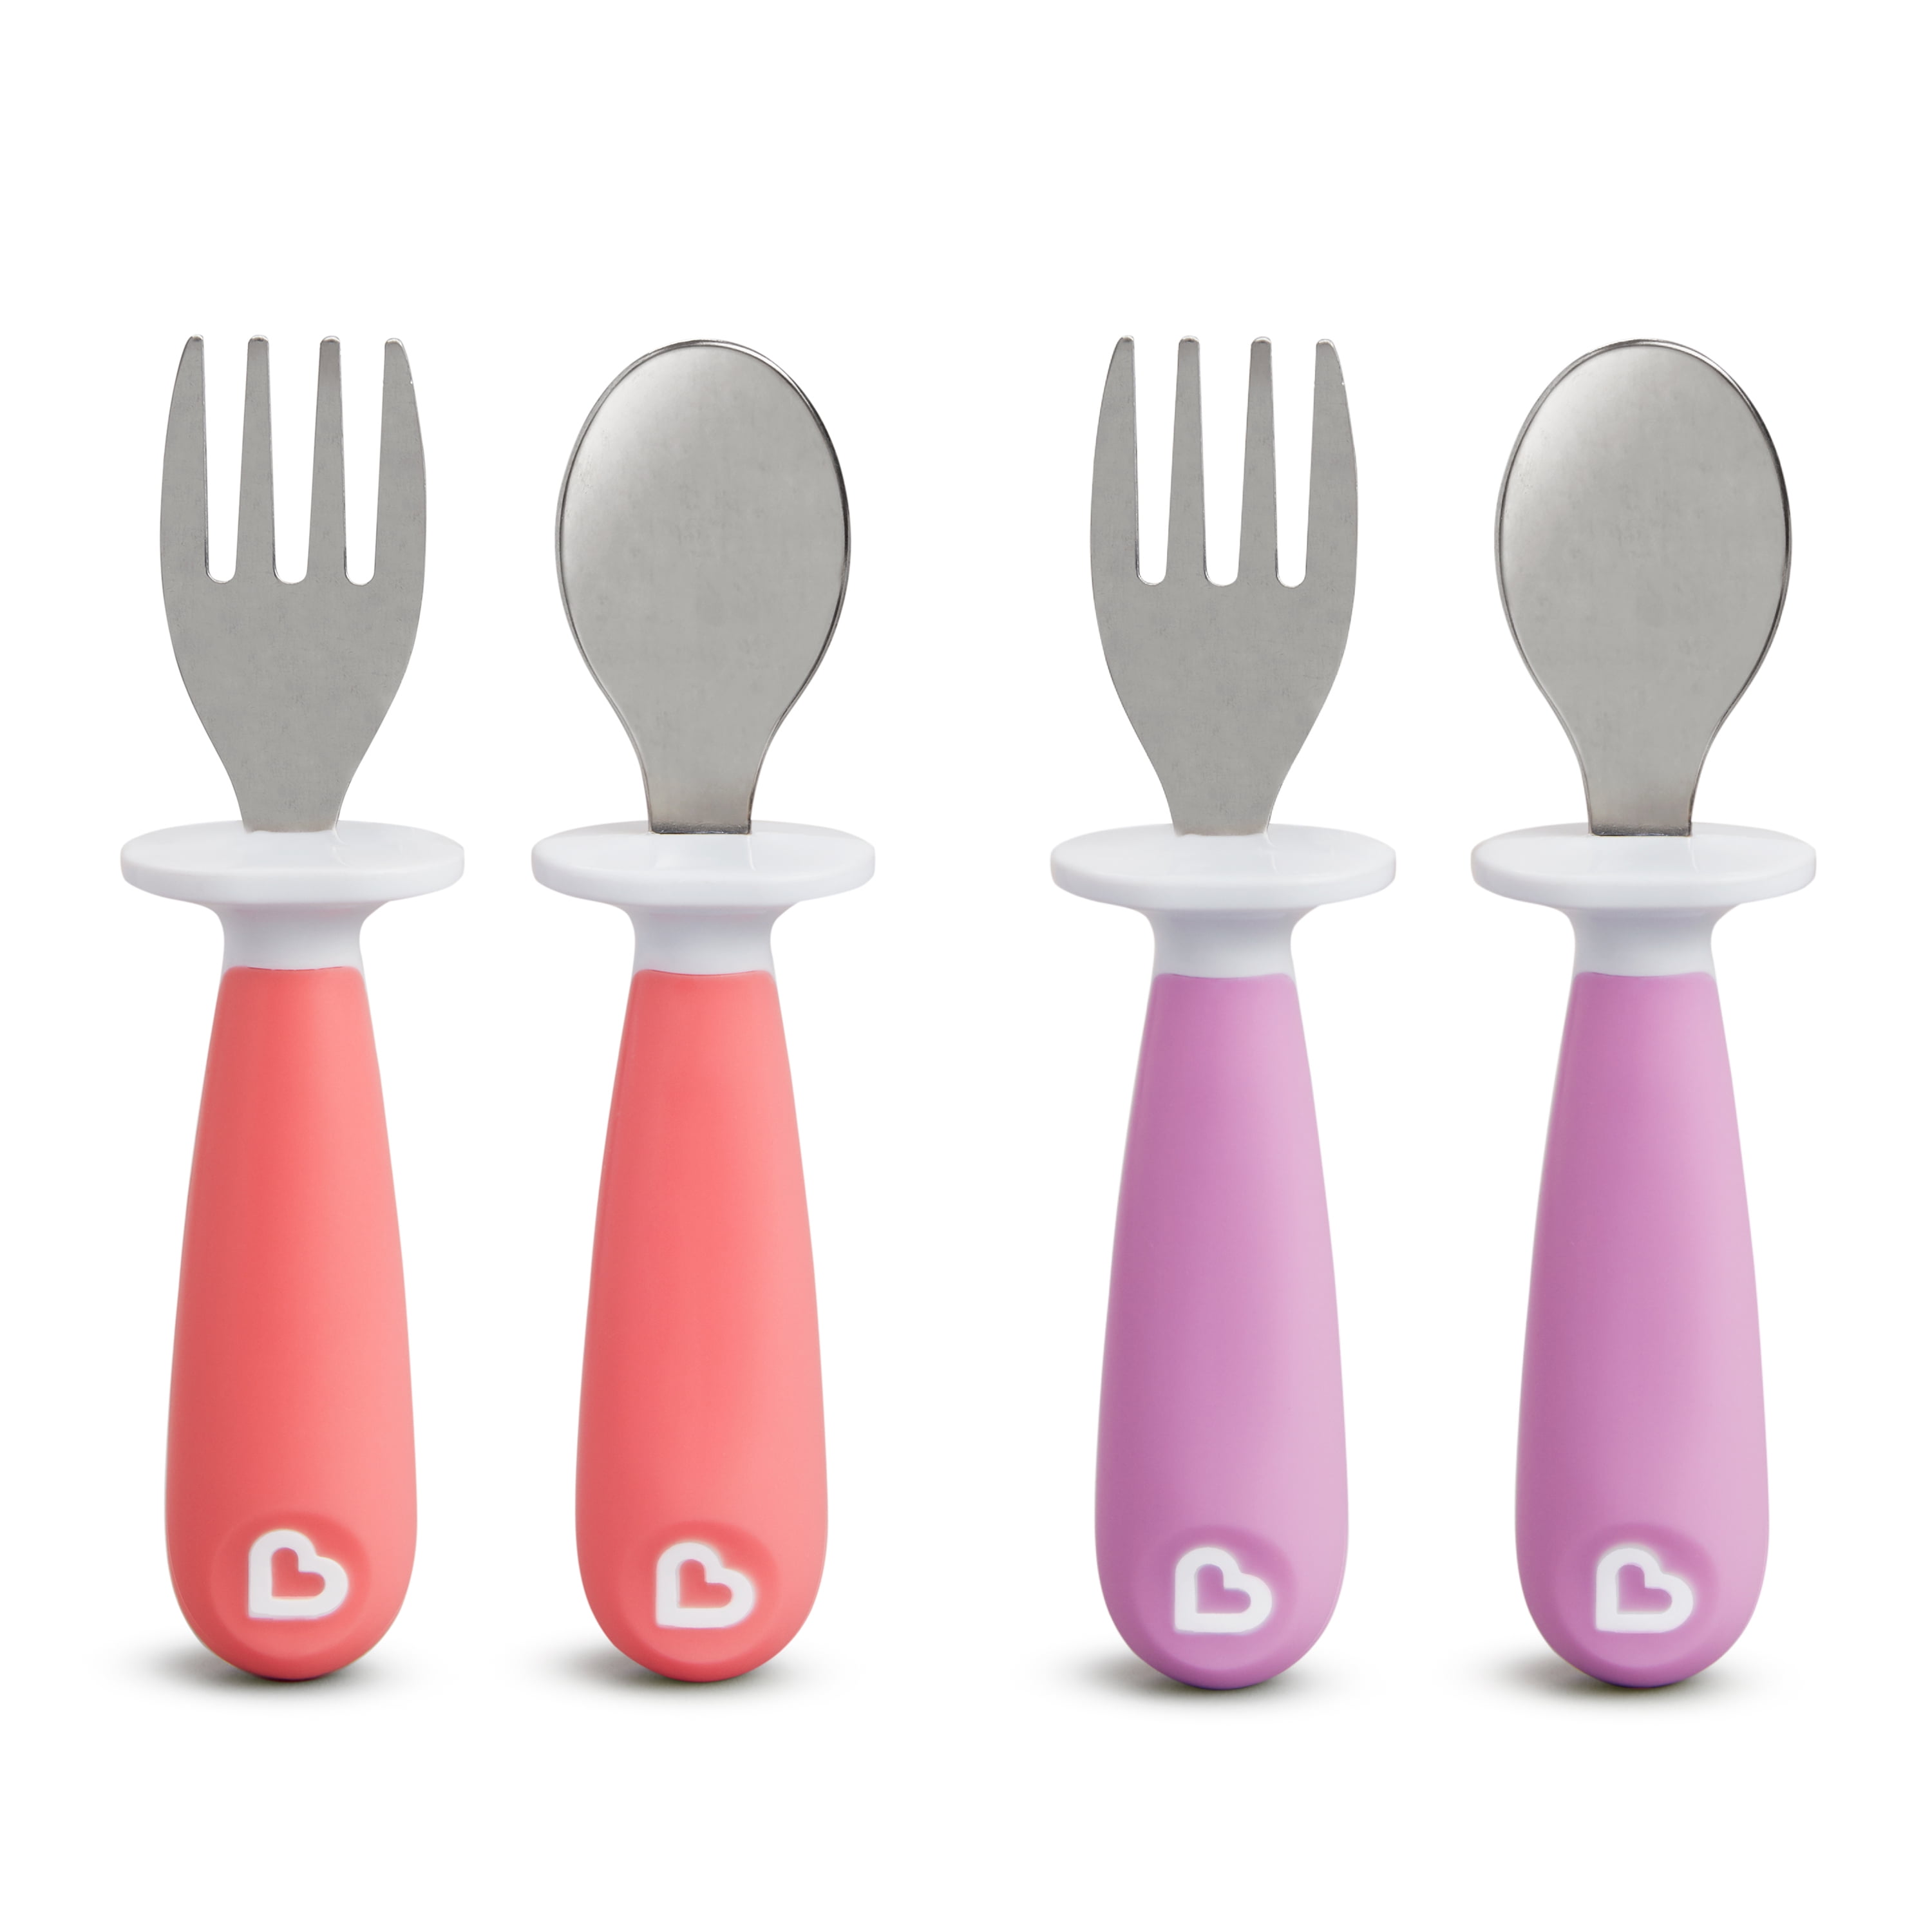 Munchkin Multi Forks & Spoons, 12+ Months - 6 count